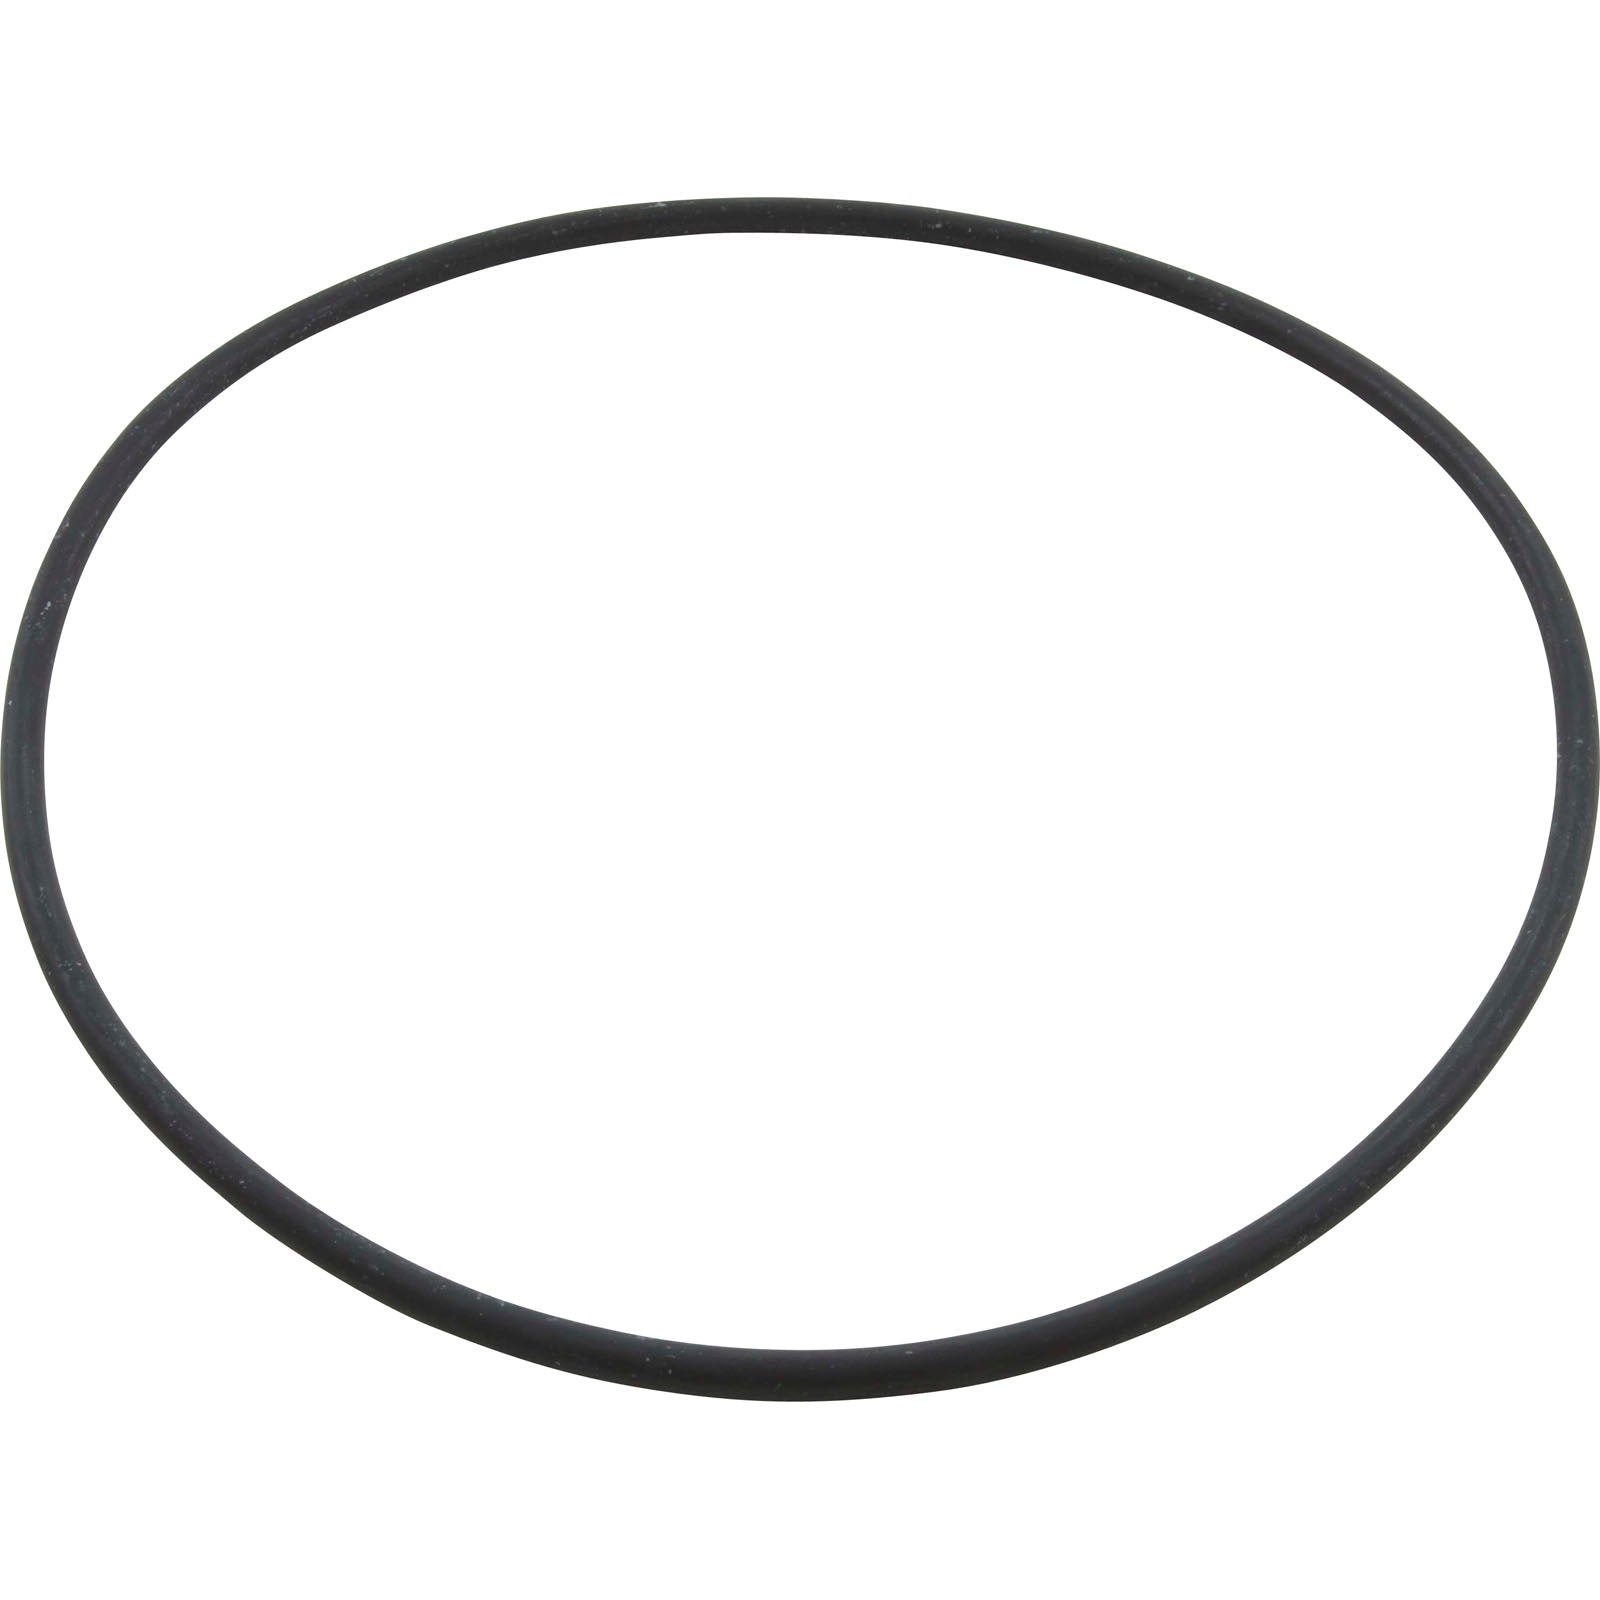 O-Ring, Speck 433, Housing- 2920341220